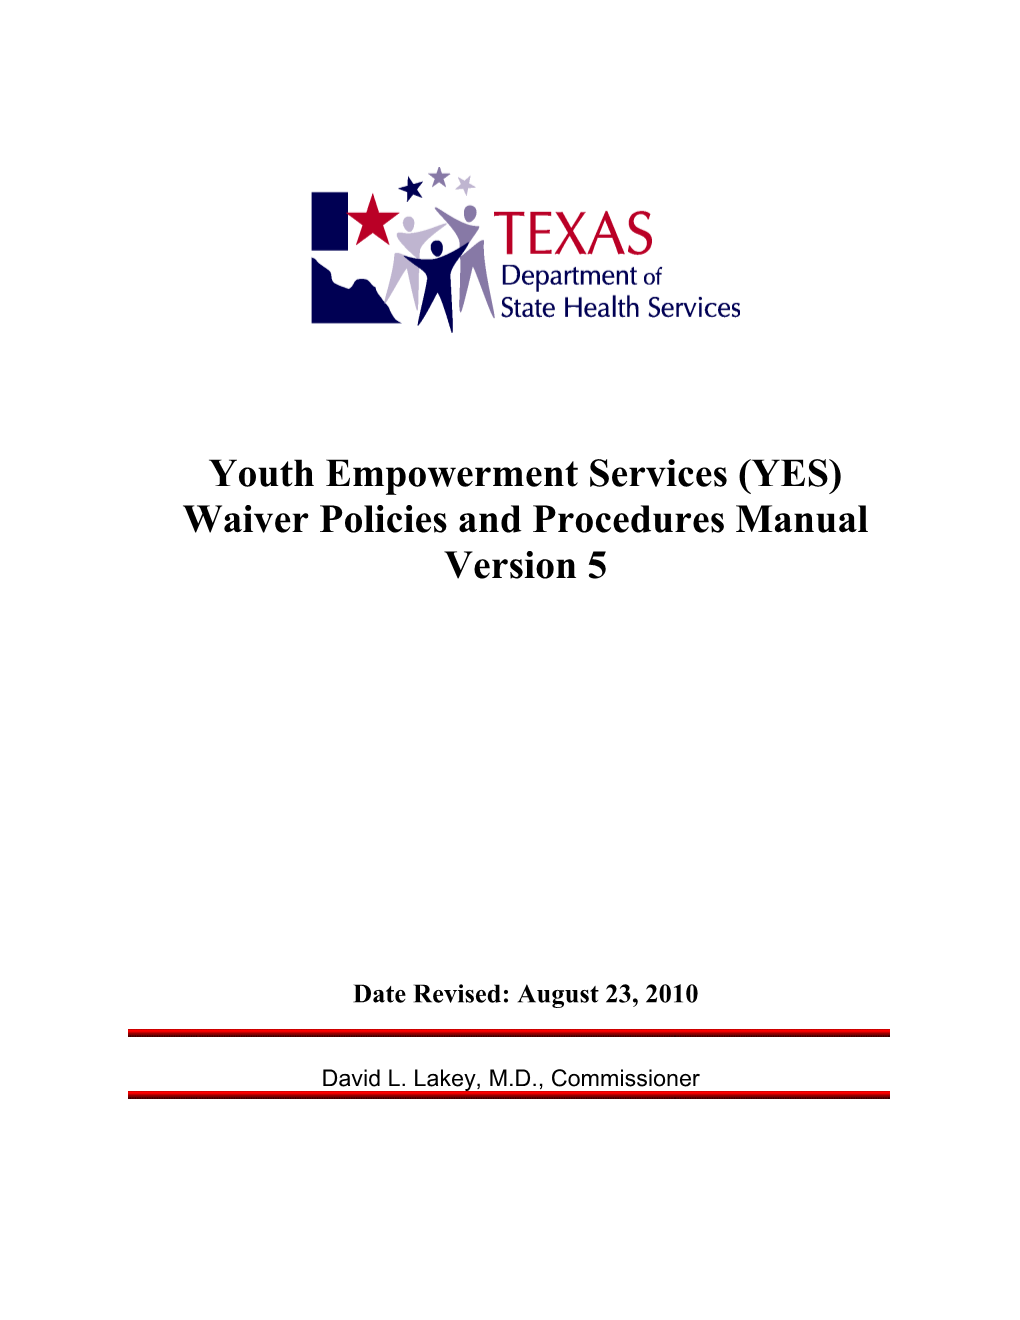 Youth Empowerment Services (YES) Waiver Policies and Procedures Manual